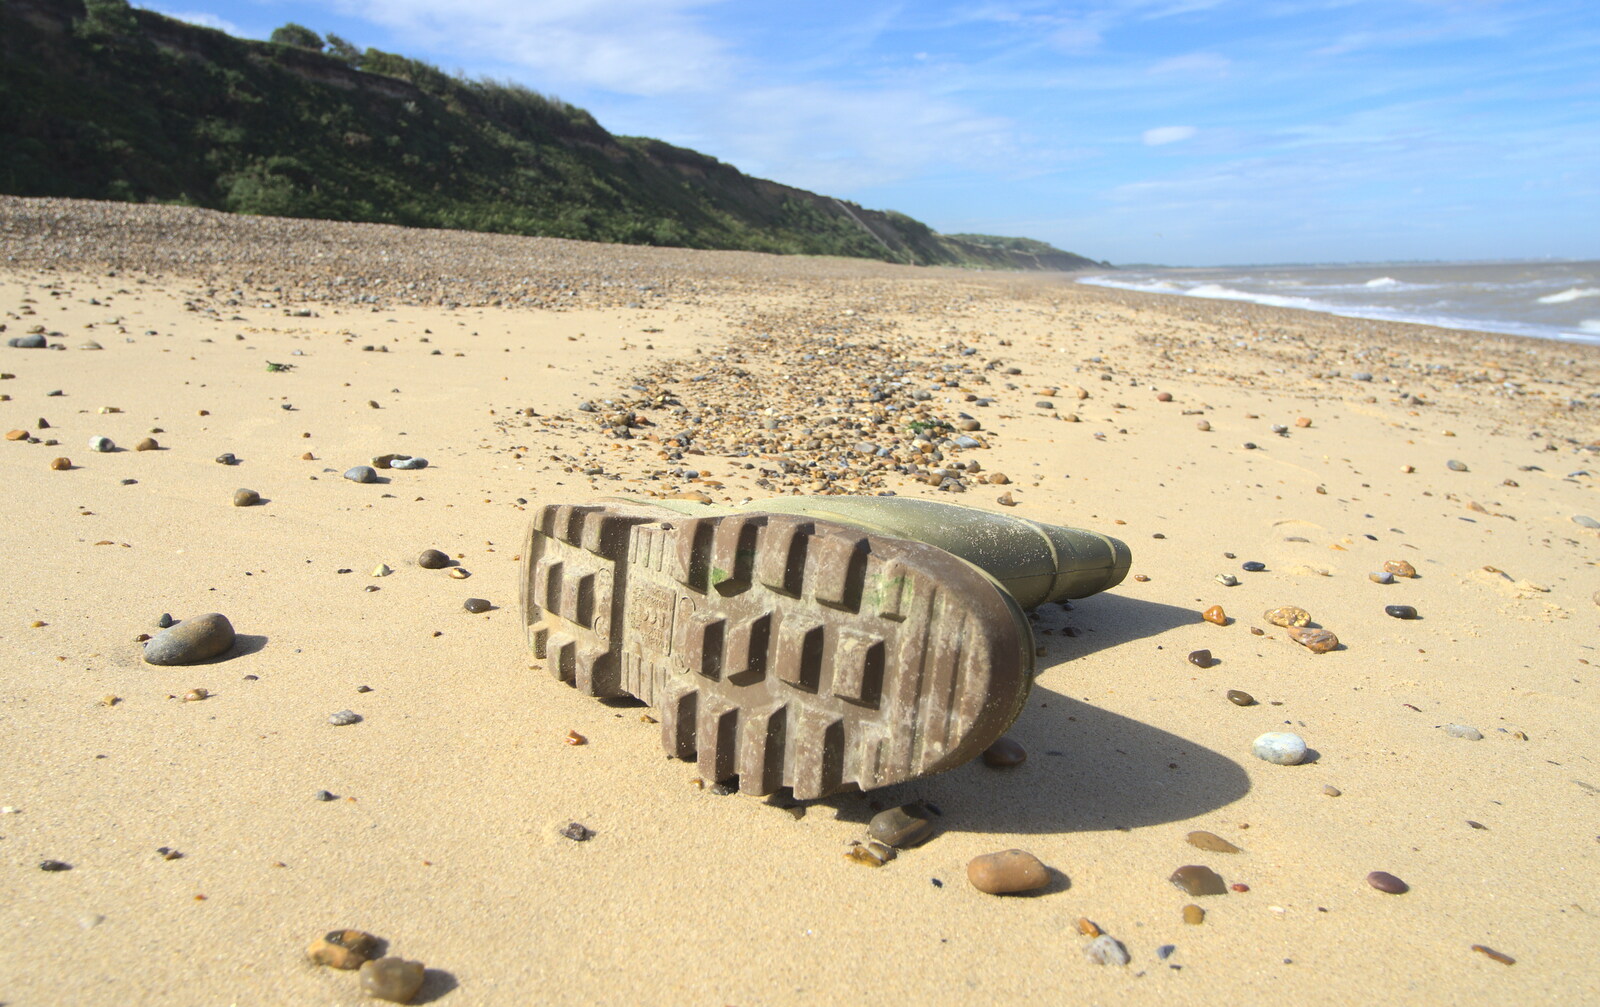 A discarded boot from Camping by the Seaside, Cliff House, Dunwich, Suffolk - 15th August 2012